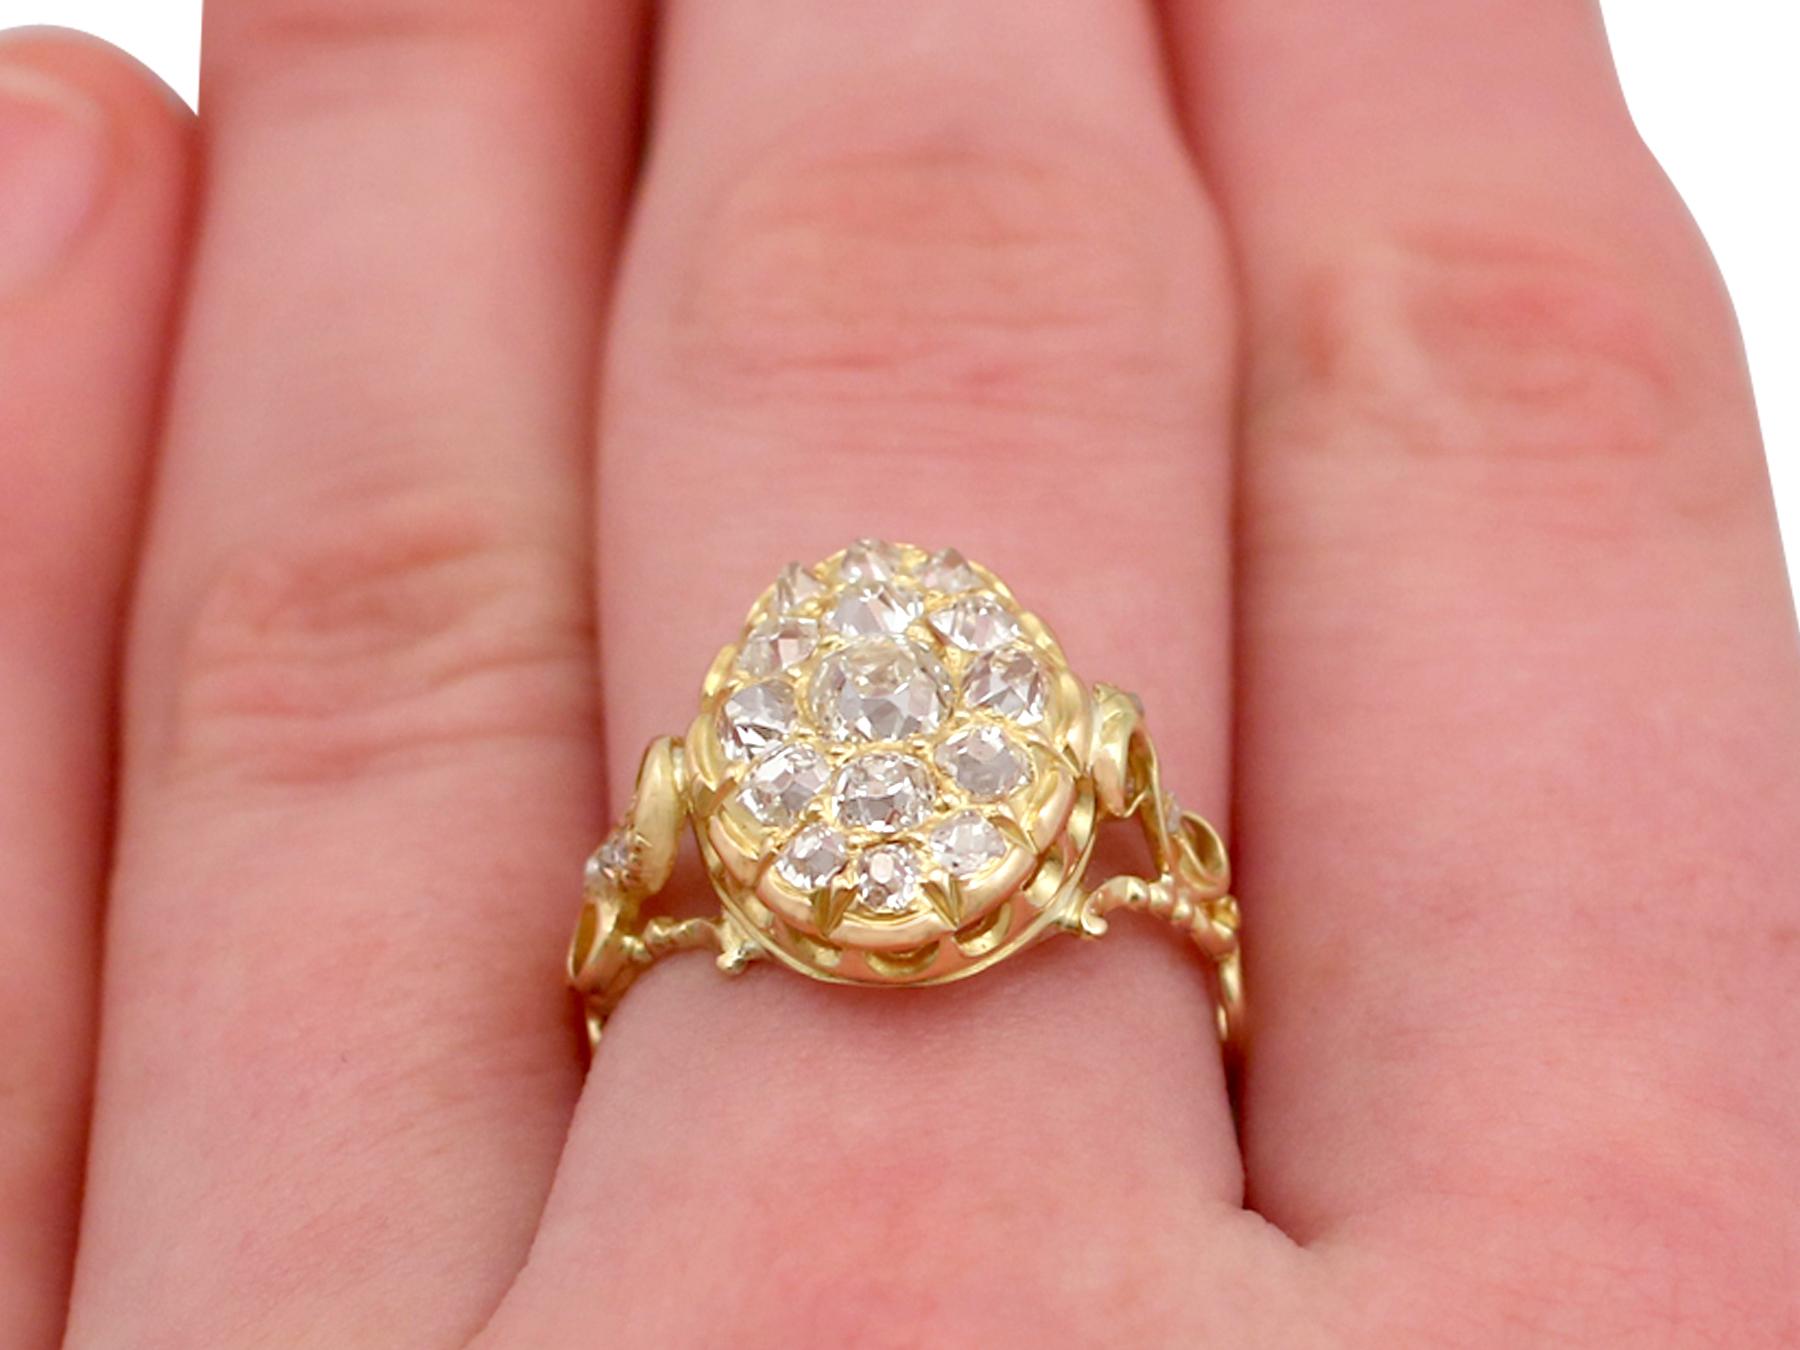 1870s Antique Victorian 1.51 Carat Diamond and Yellow Gold Cocktail Ring 4